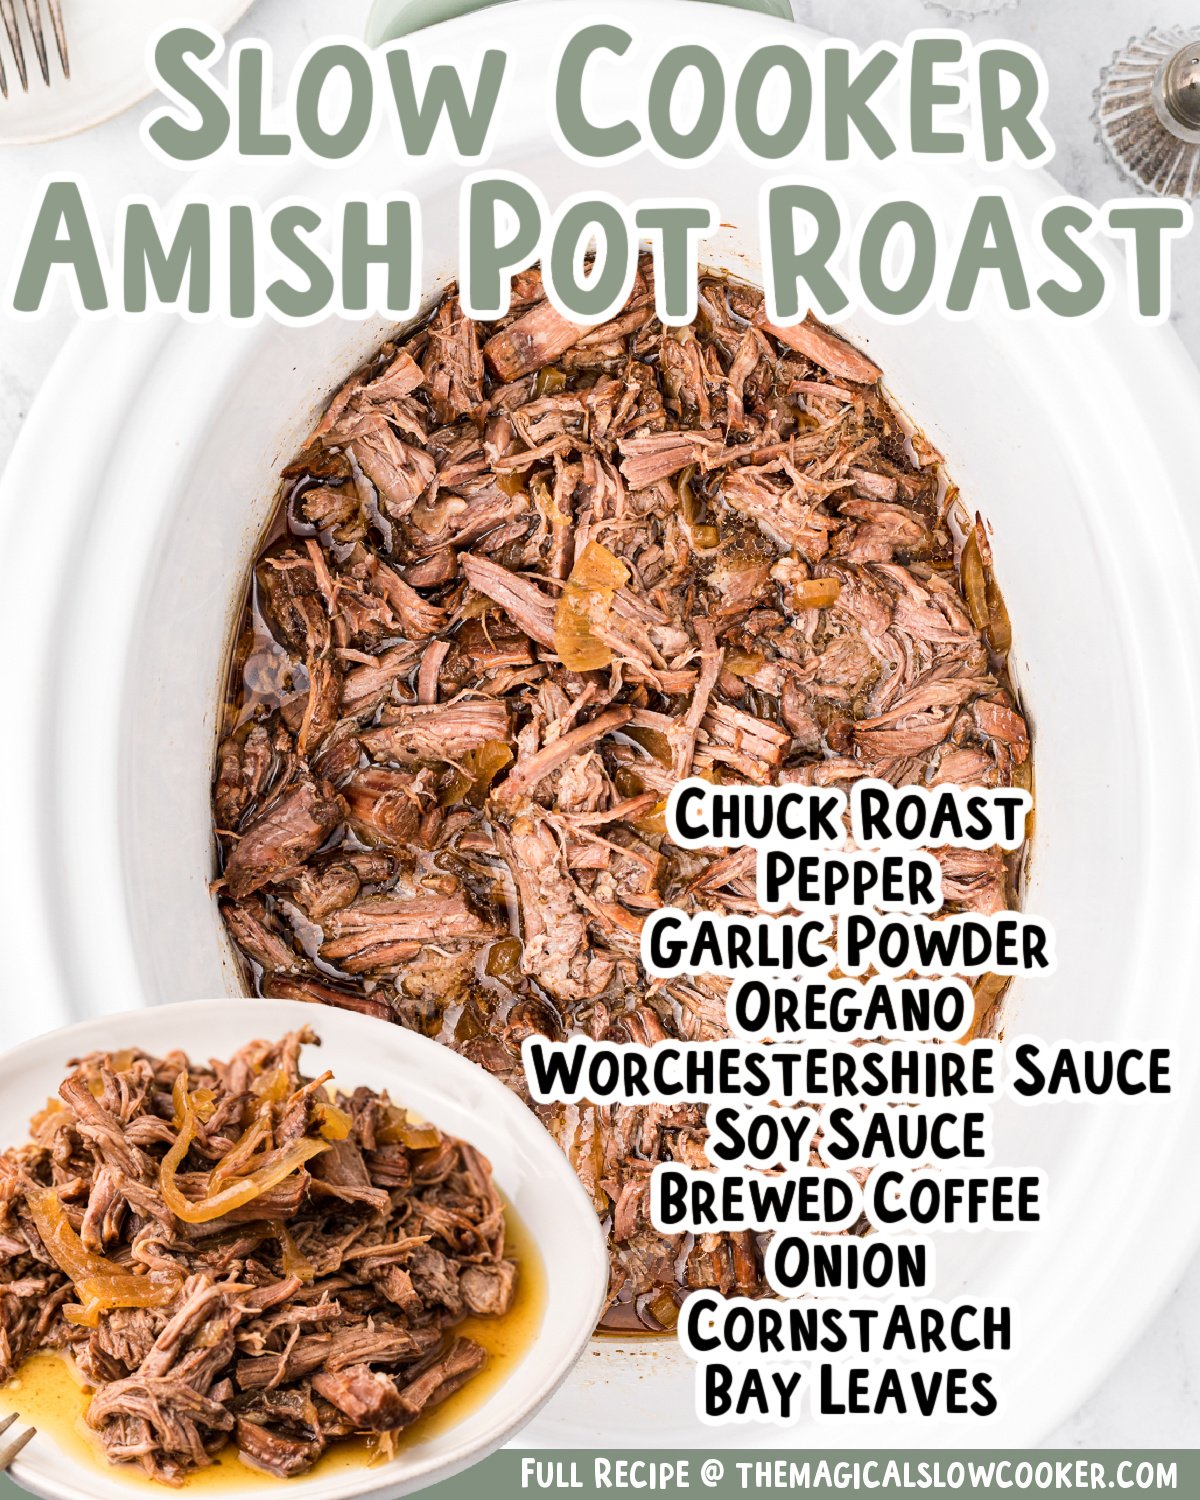 Slow Cooker Amish Pot Roast - The Magical Slow Cooker